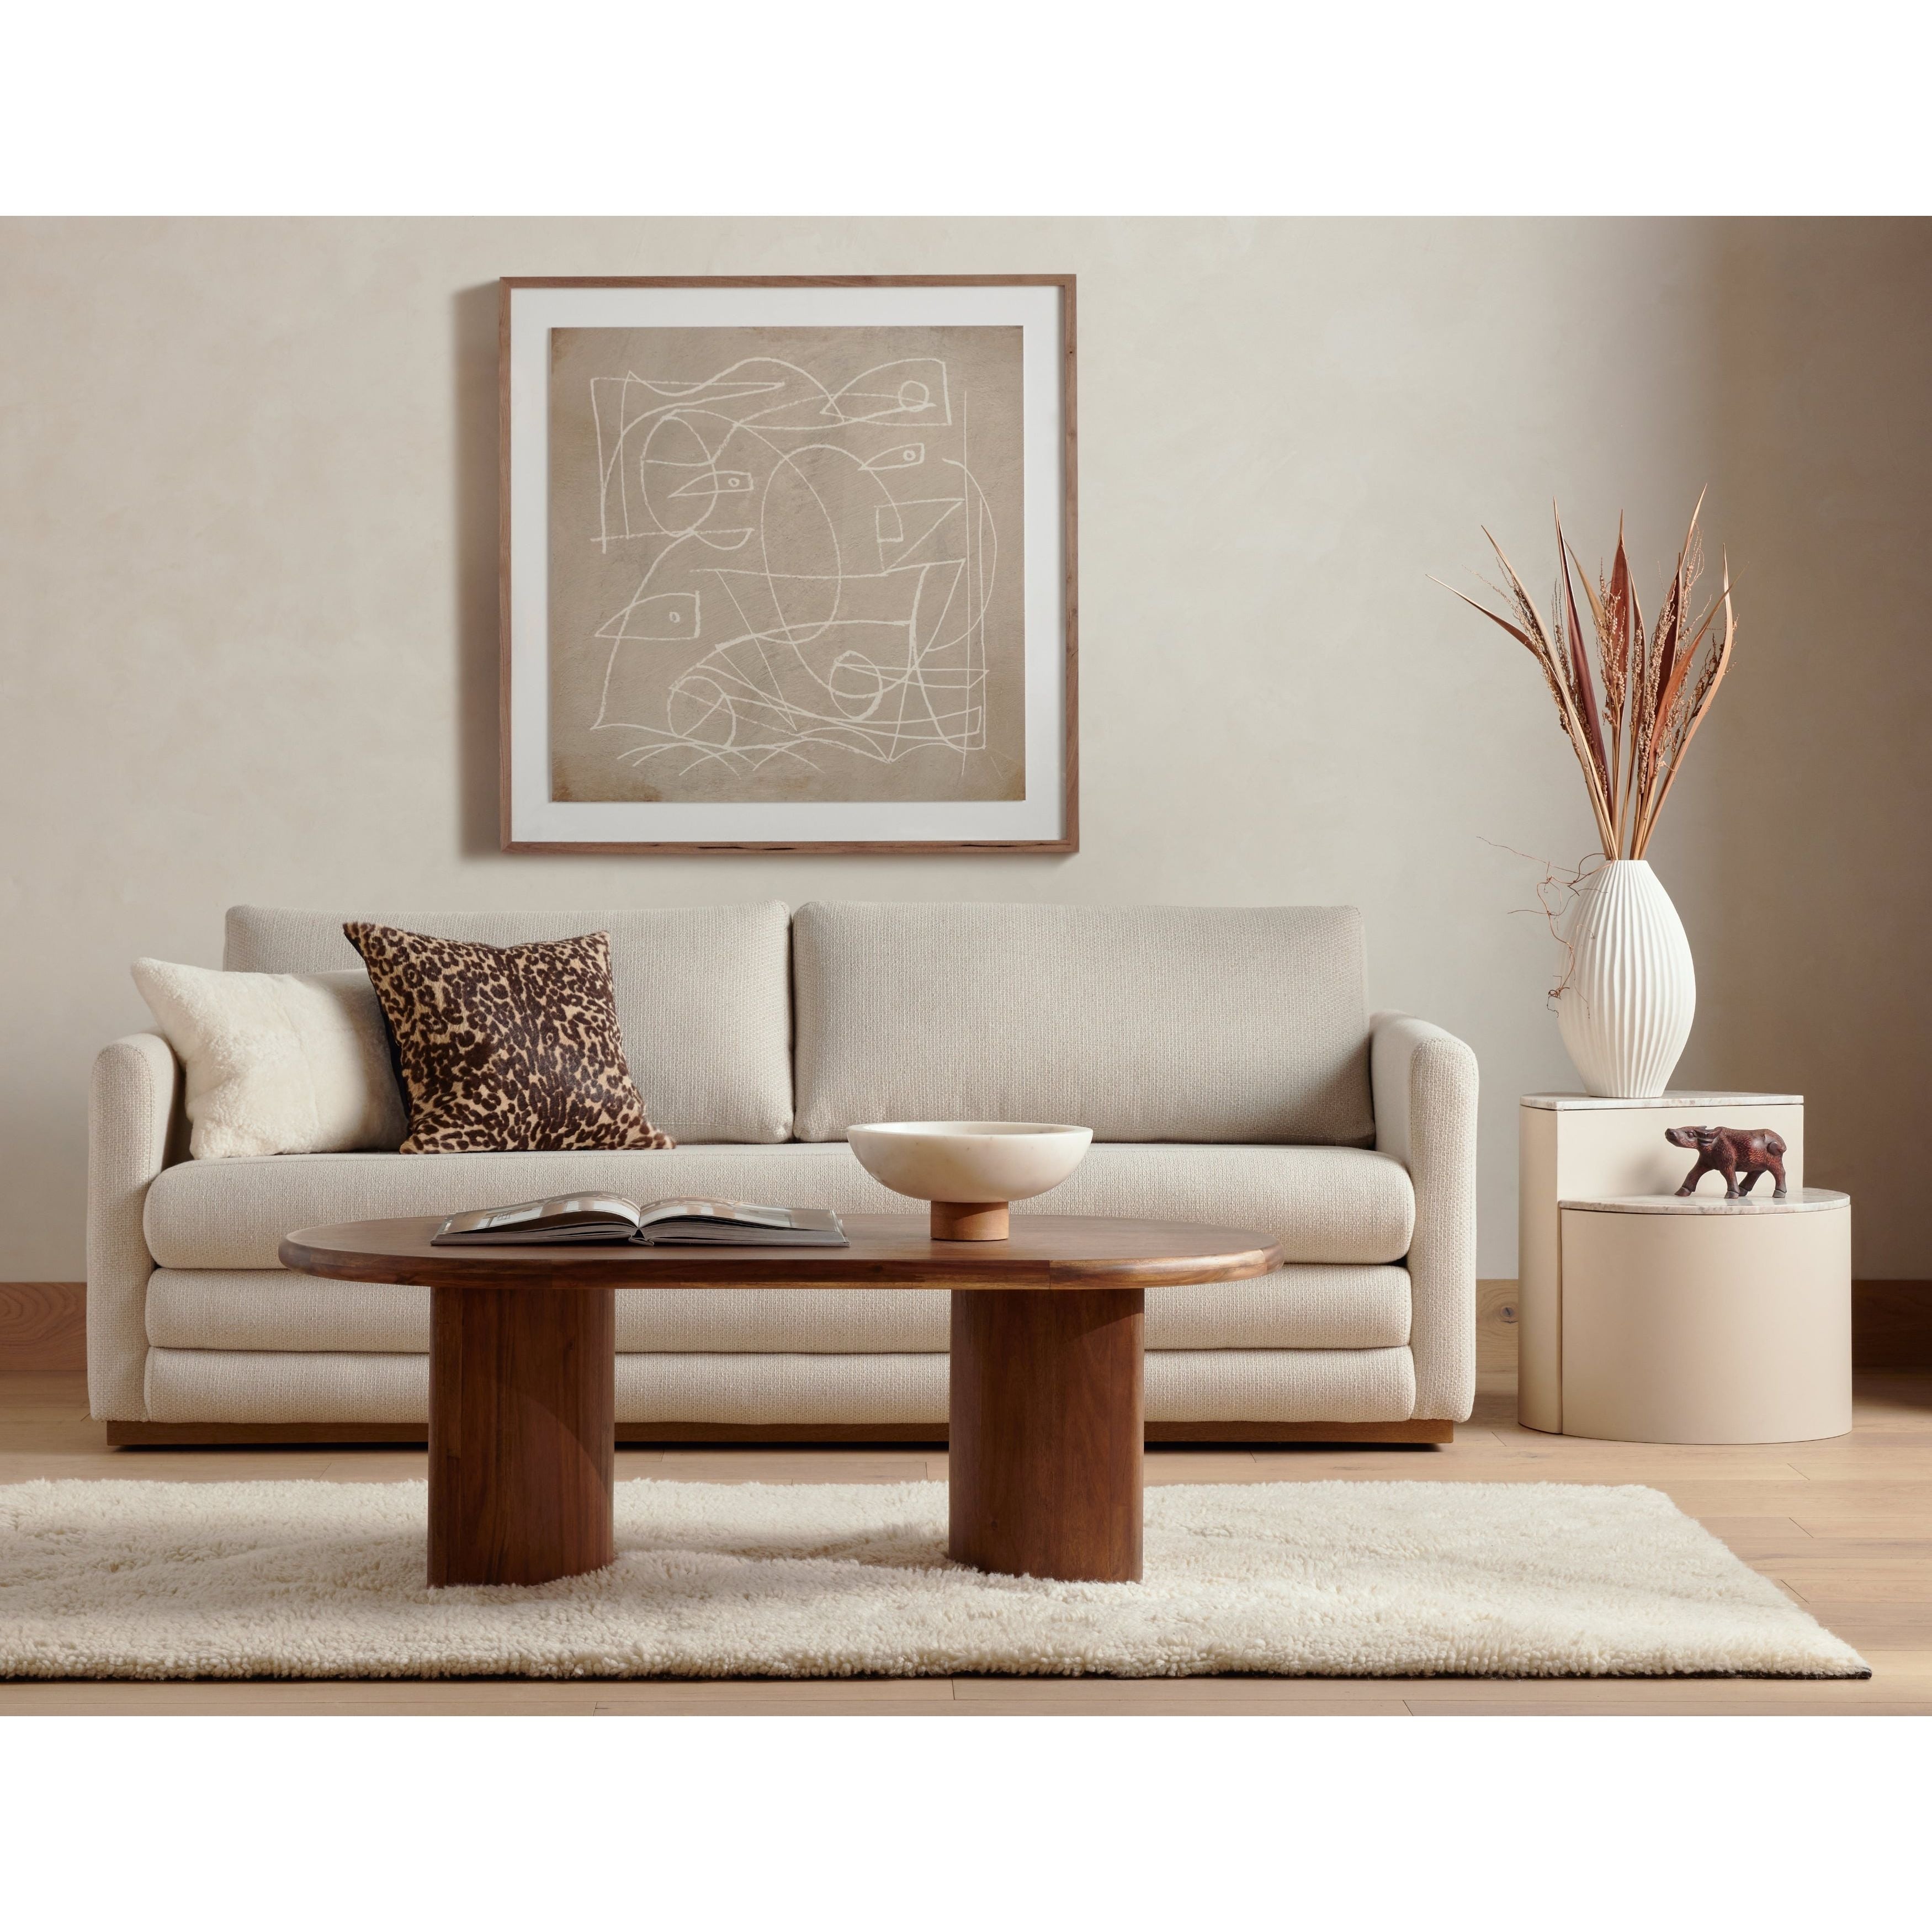 A study in shape. Solid brown acacia forms crescent-shaped legs and sprawling oval tabletop, bringing organic presence to the living room. Amethyst Home provides interior design, new construction, custom furniture and area rugs in the Calabasas metro area